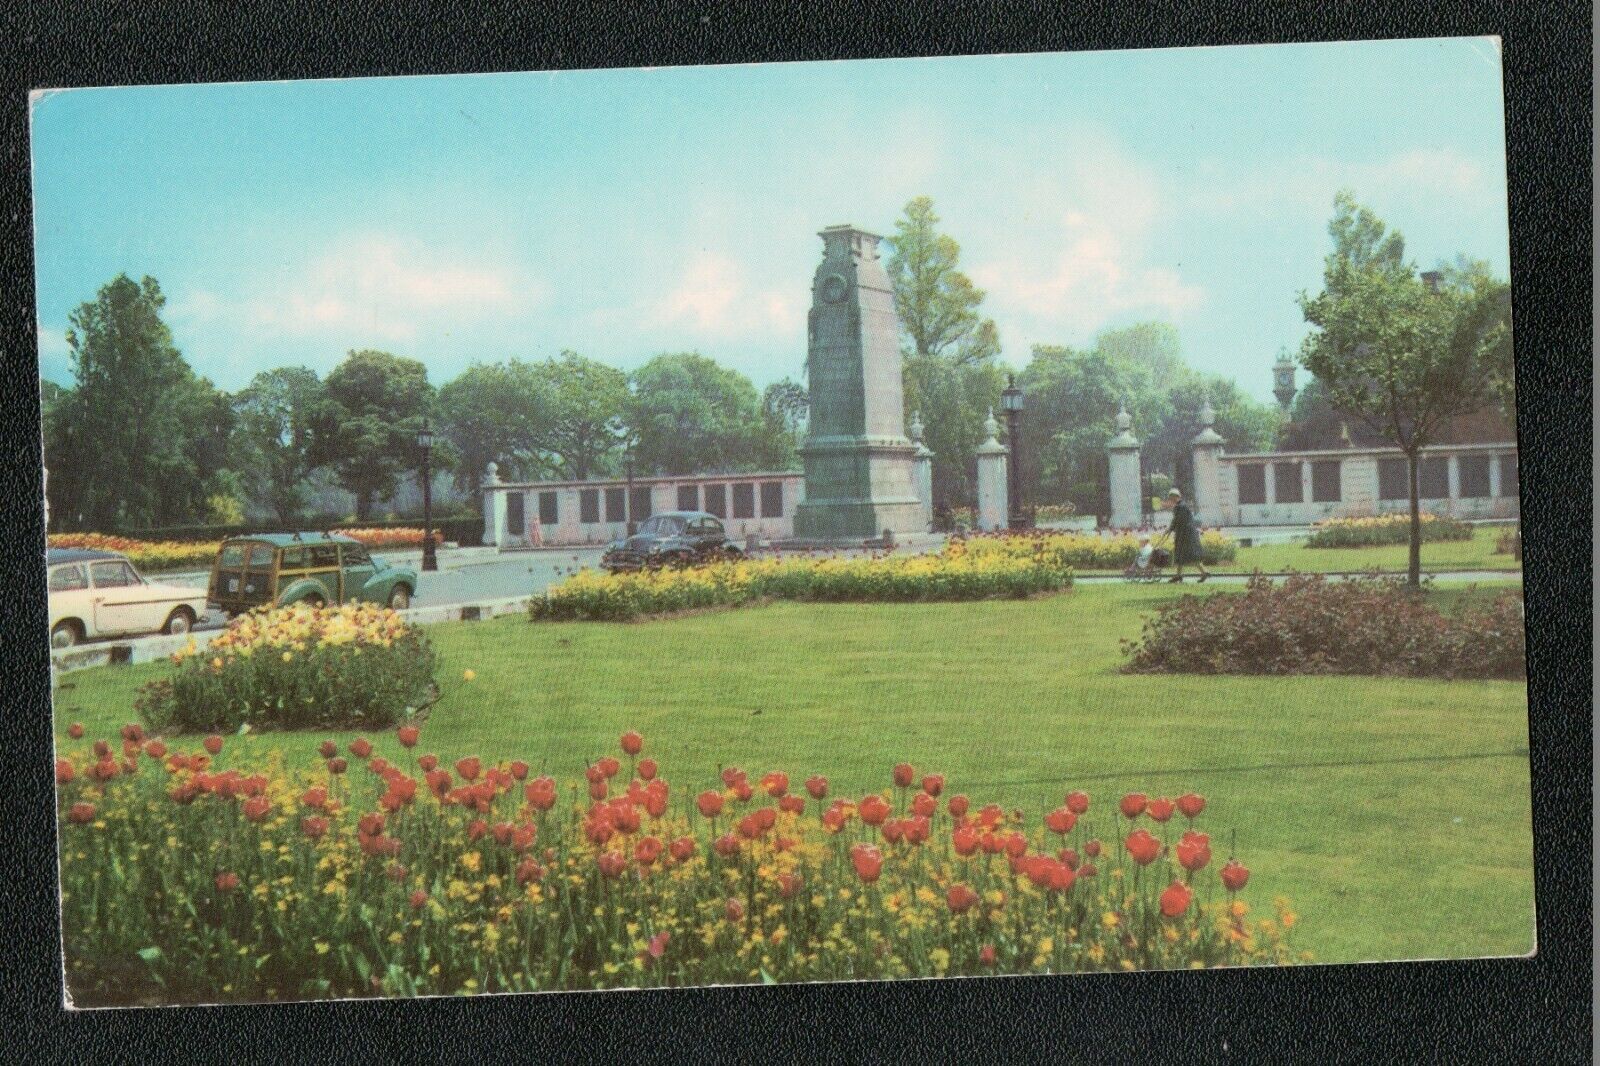 House Clearance - War Memorial & Entrance To Albert Park Middlesbrough 1970's ? Service Yorkshire